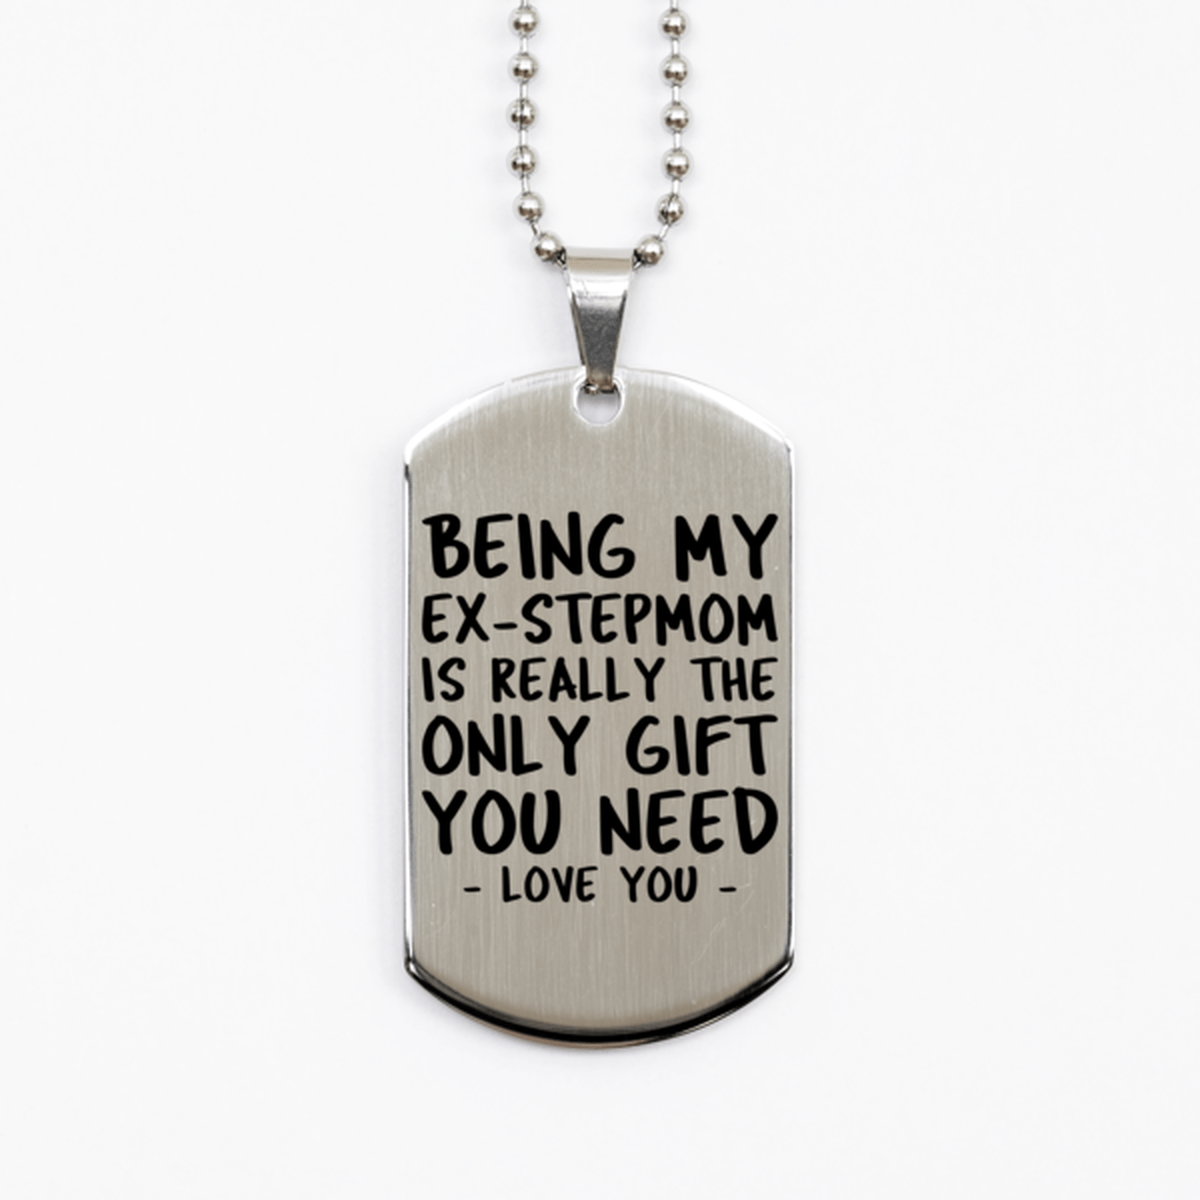 Funny Ex-stepmom Silver Dog Tag Necklace, Being My Ex-stepmom Is Really the Only Gift You Need, Best Birthday Gifts for Ex-stepmom